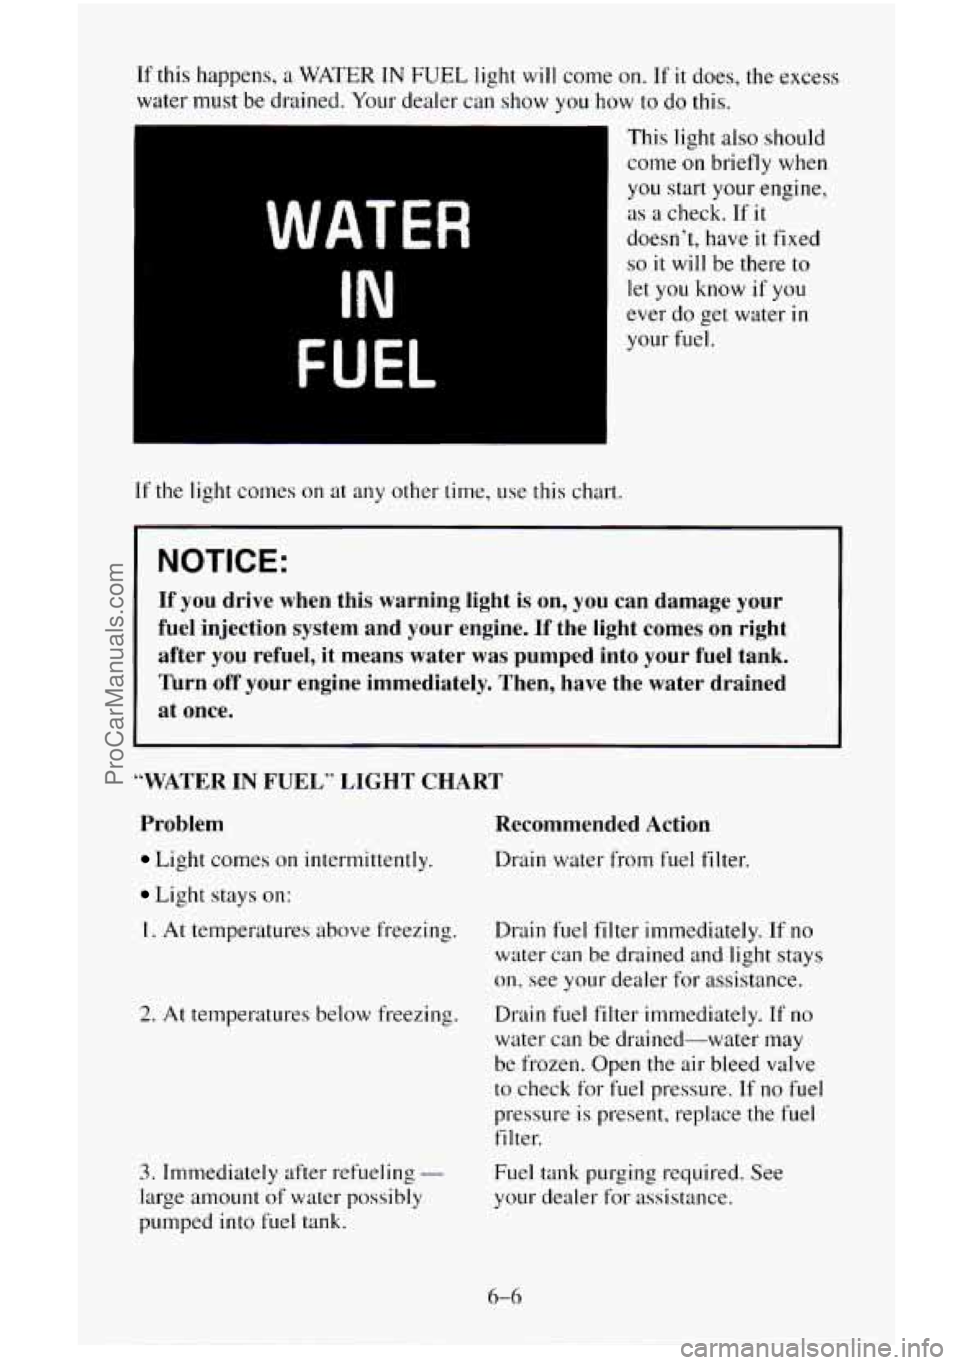 CHEVROLET SUBURBAN 1996  Owners Manual If this happens, a WATER IN FUEL light will  come 
water must  be drained.  Your  Cfpder  can show you 
hc 
I 
WATER 
IN 
FUEL 
If the light comes  on  at any other  time, use this  chart. 
! on. If i